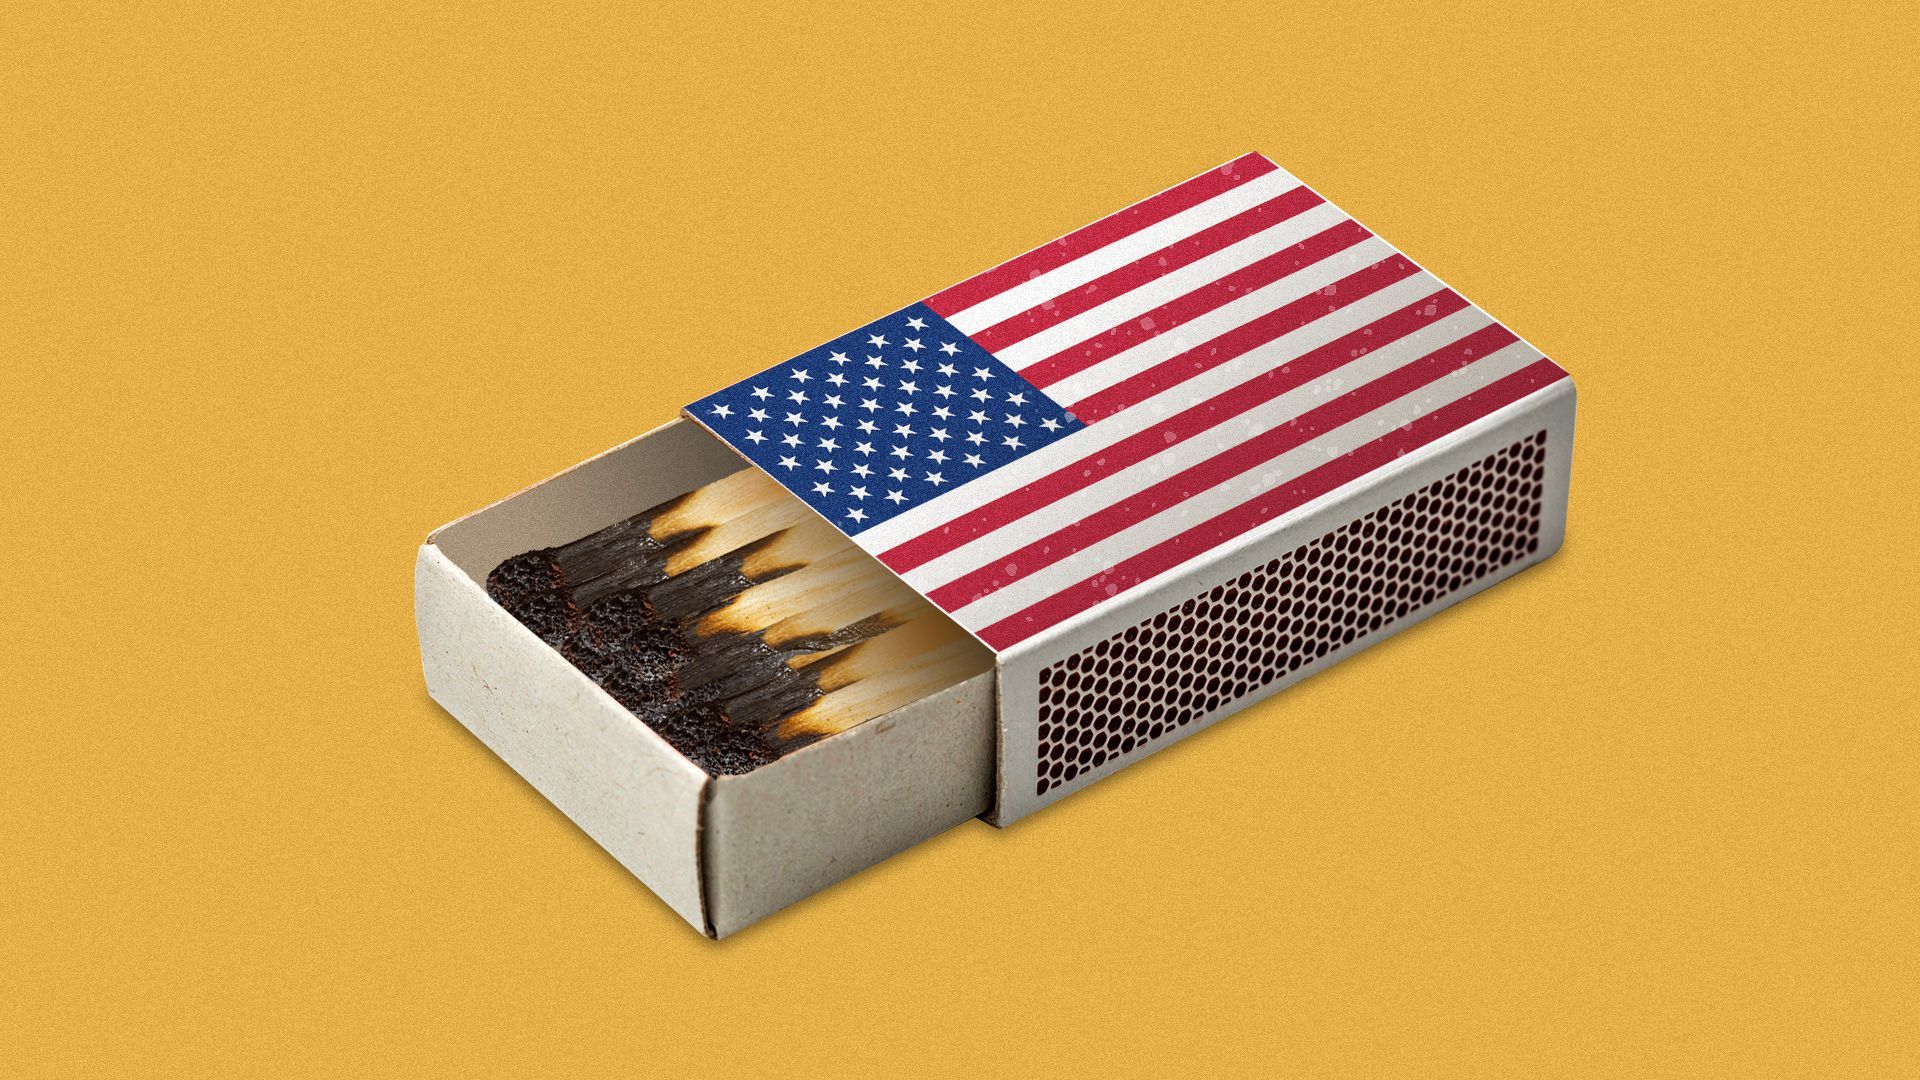 Illustration of a matchbox with an American flag printed on top. The matchbox is partly open and all the matches inside are burnt up. 